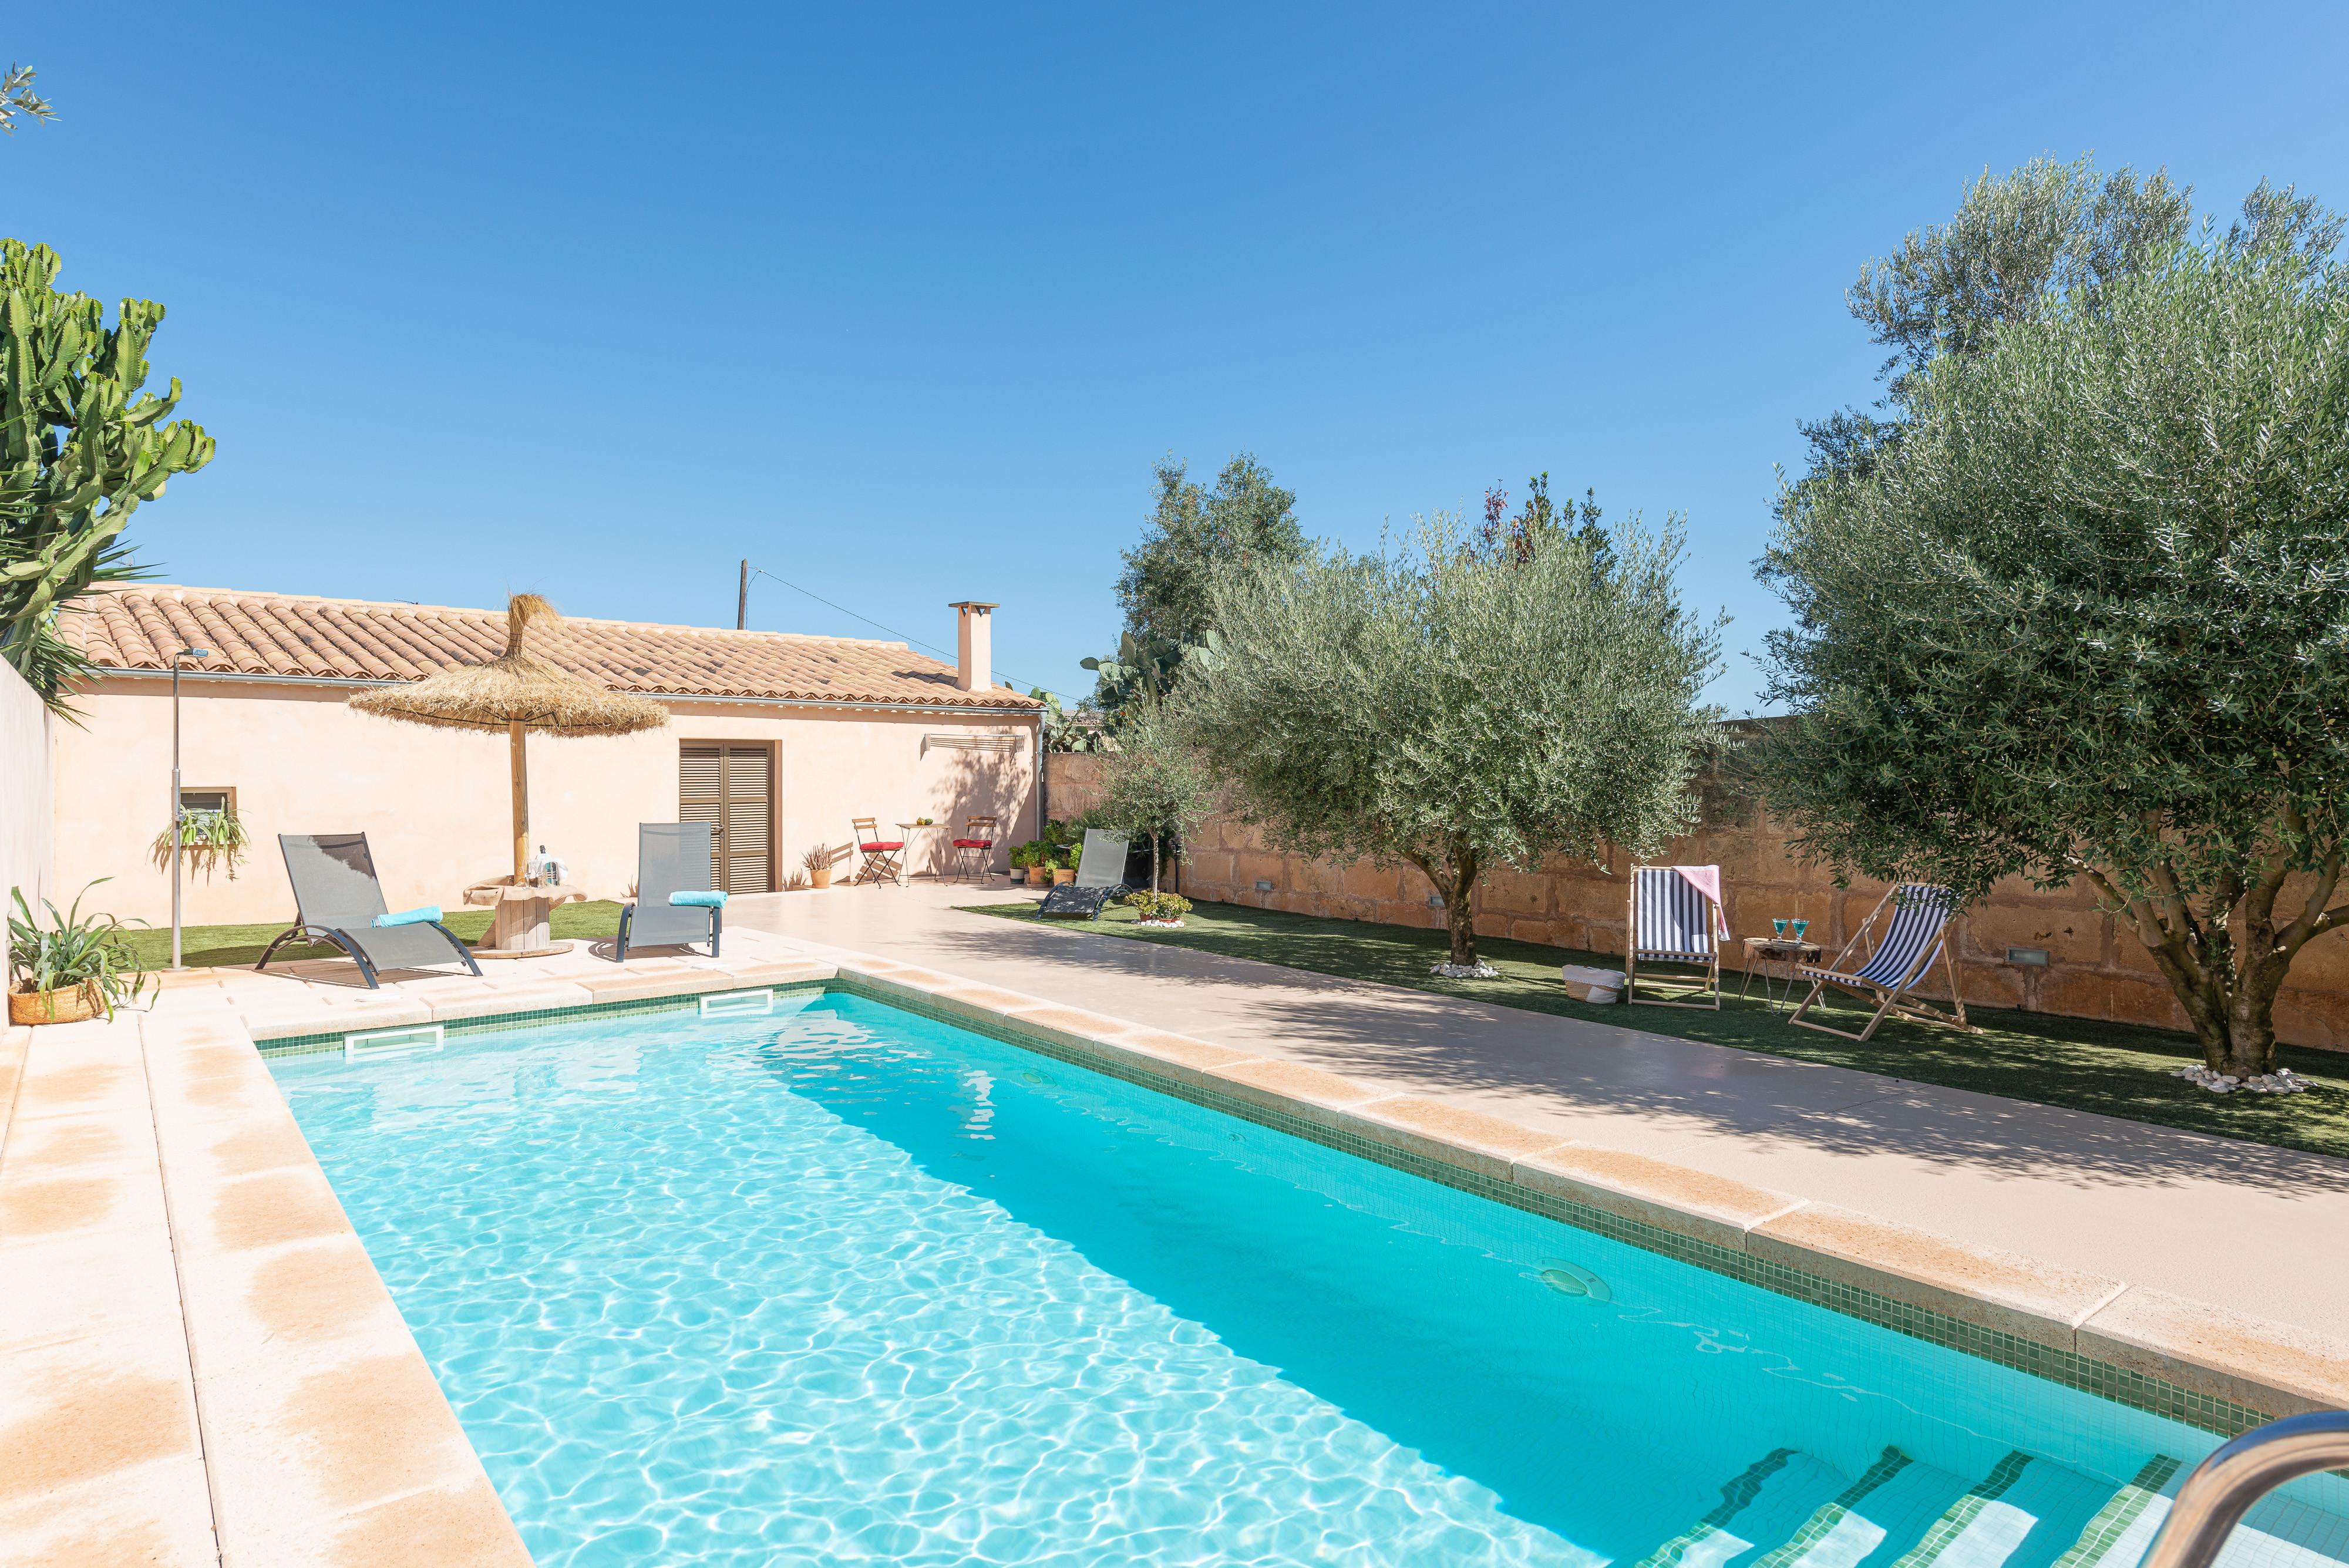 Property Image 1 - CA SES NINES - Cosy townhouse with private pool in inland Majorca. Free WiFi